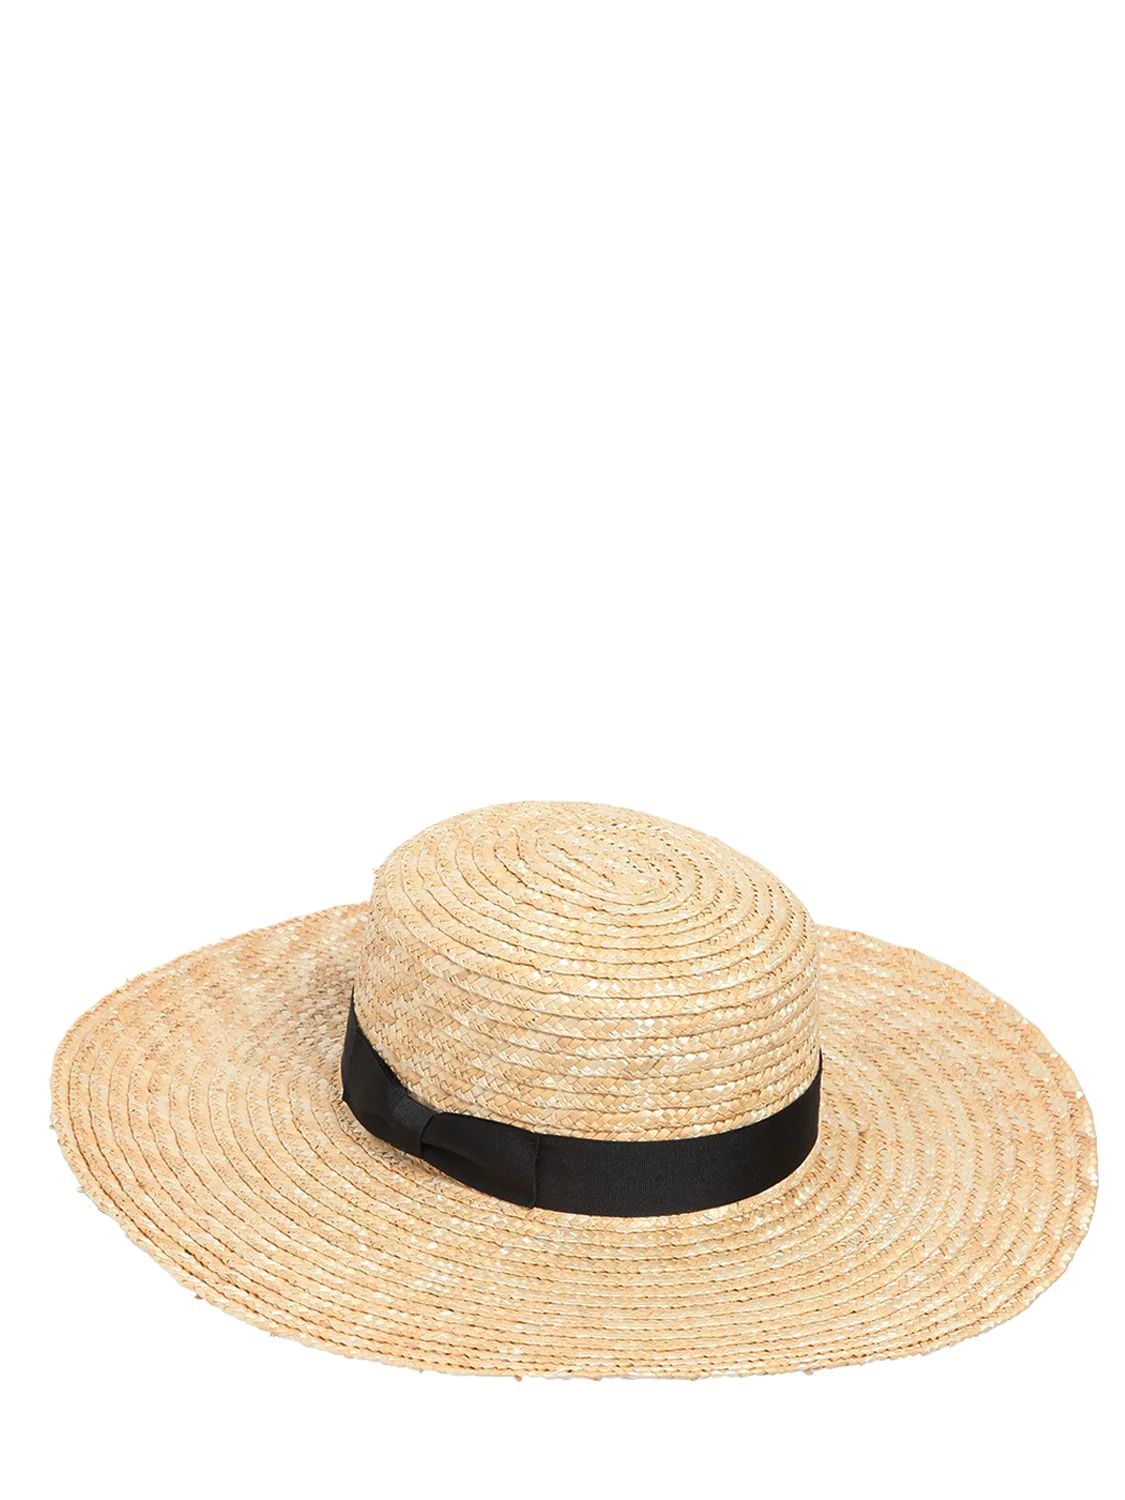 THE SPENCER WIDE BRIMMED BOATER HAT | Luisaviaroma